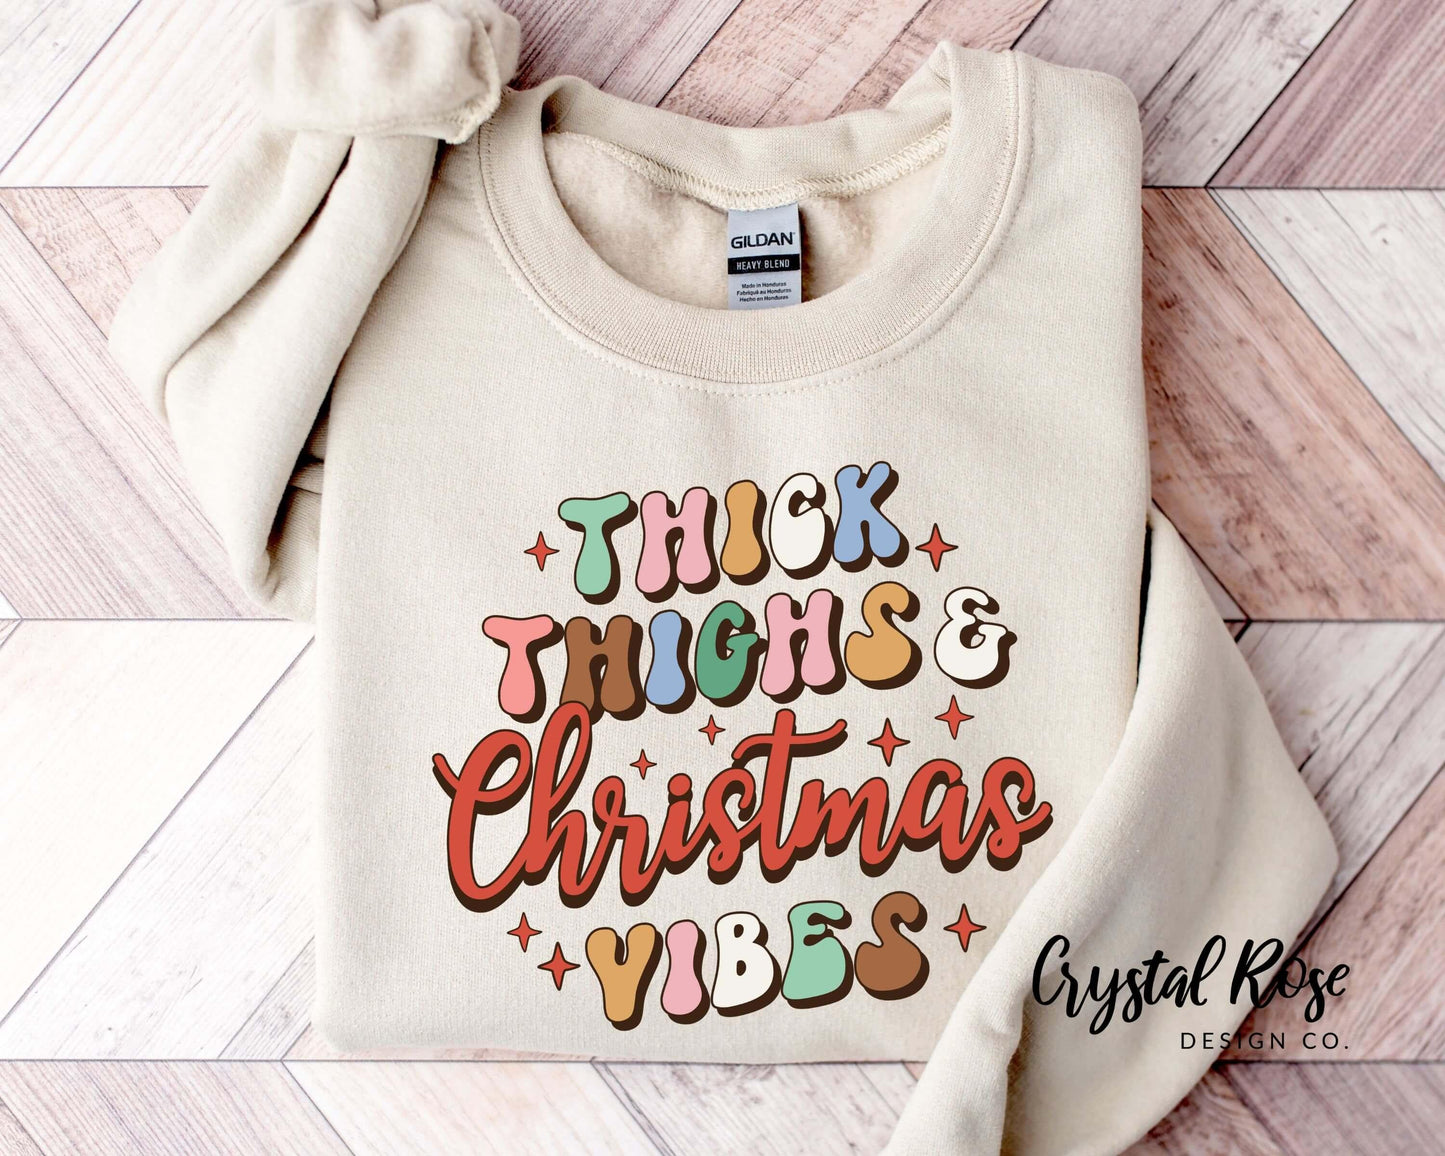 Retro Thick Thighs and Christmas Vibes Christmas Crewneck Sweater - Crystal Rose Design Co.